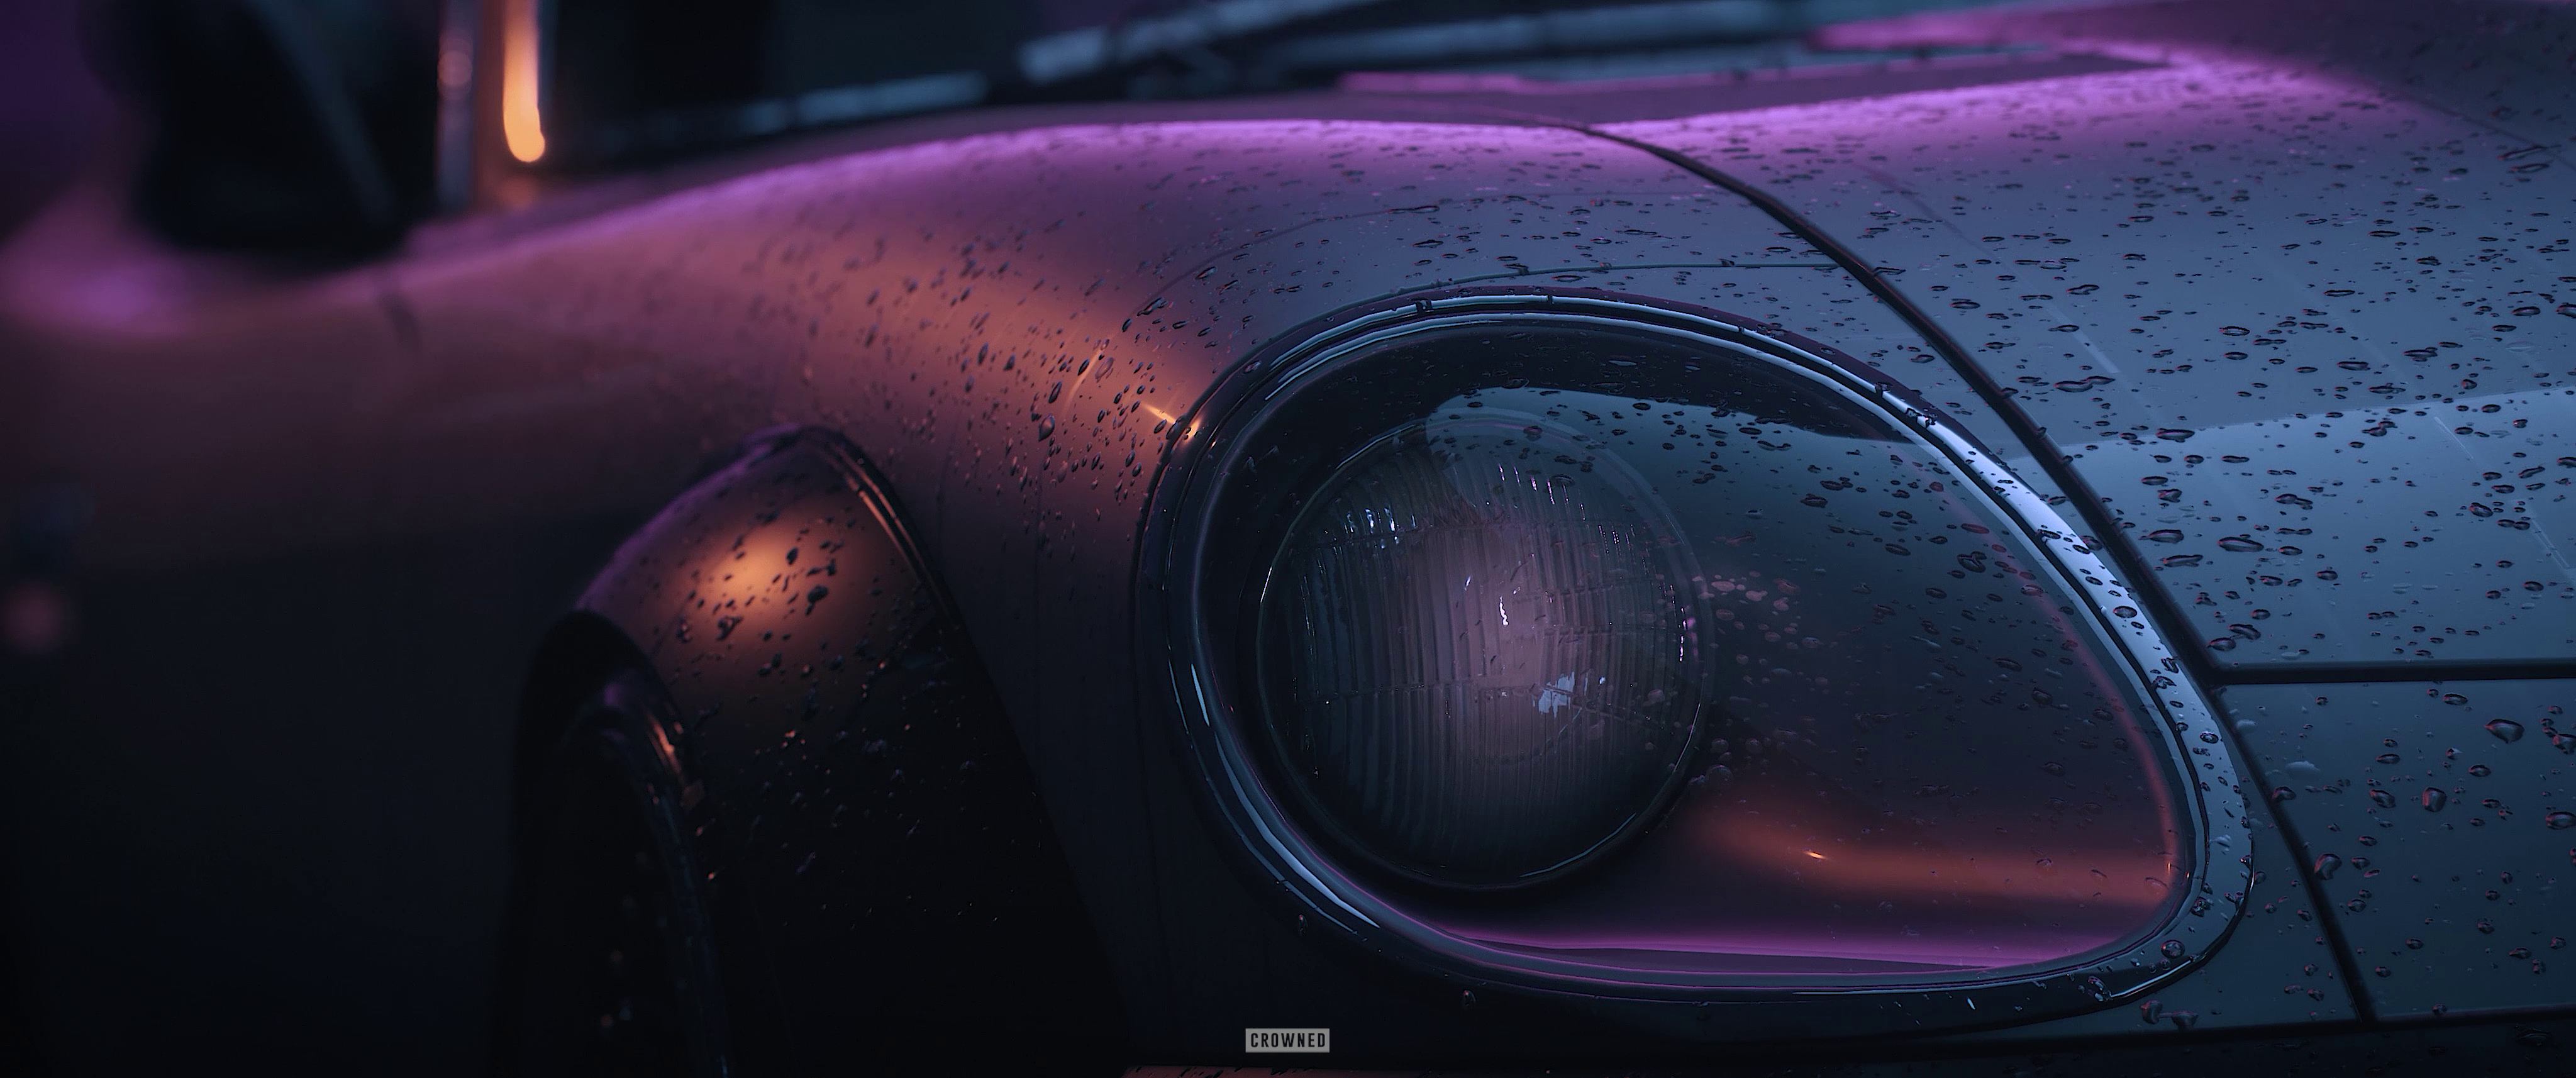 CROWNED Need For Speed Datsun 240Z Purple Nissan S30 Closeup Car Vehicle 4096x1714